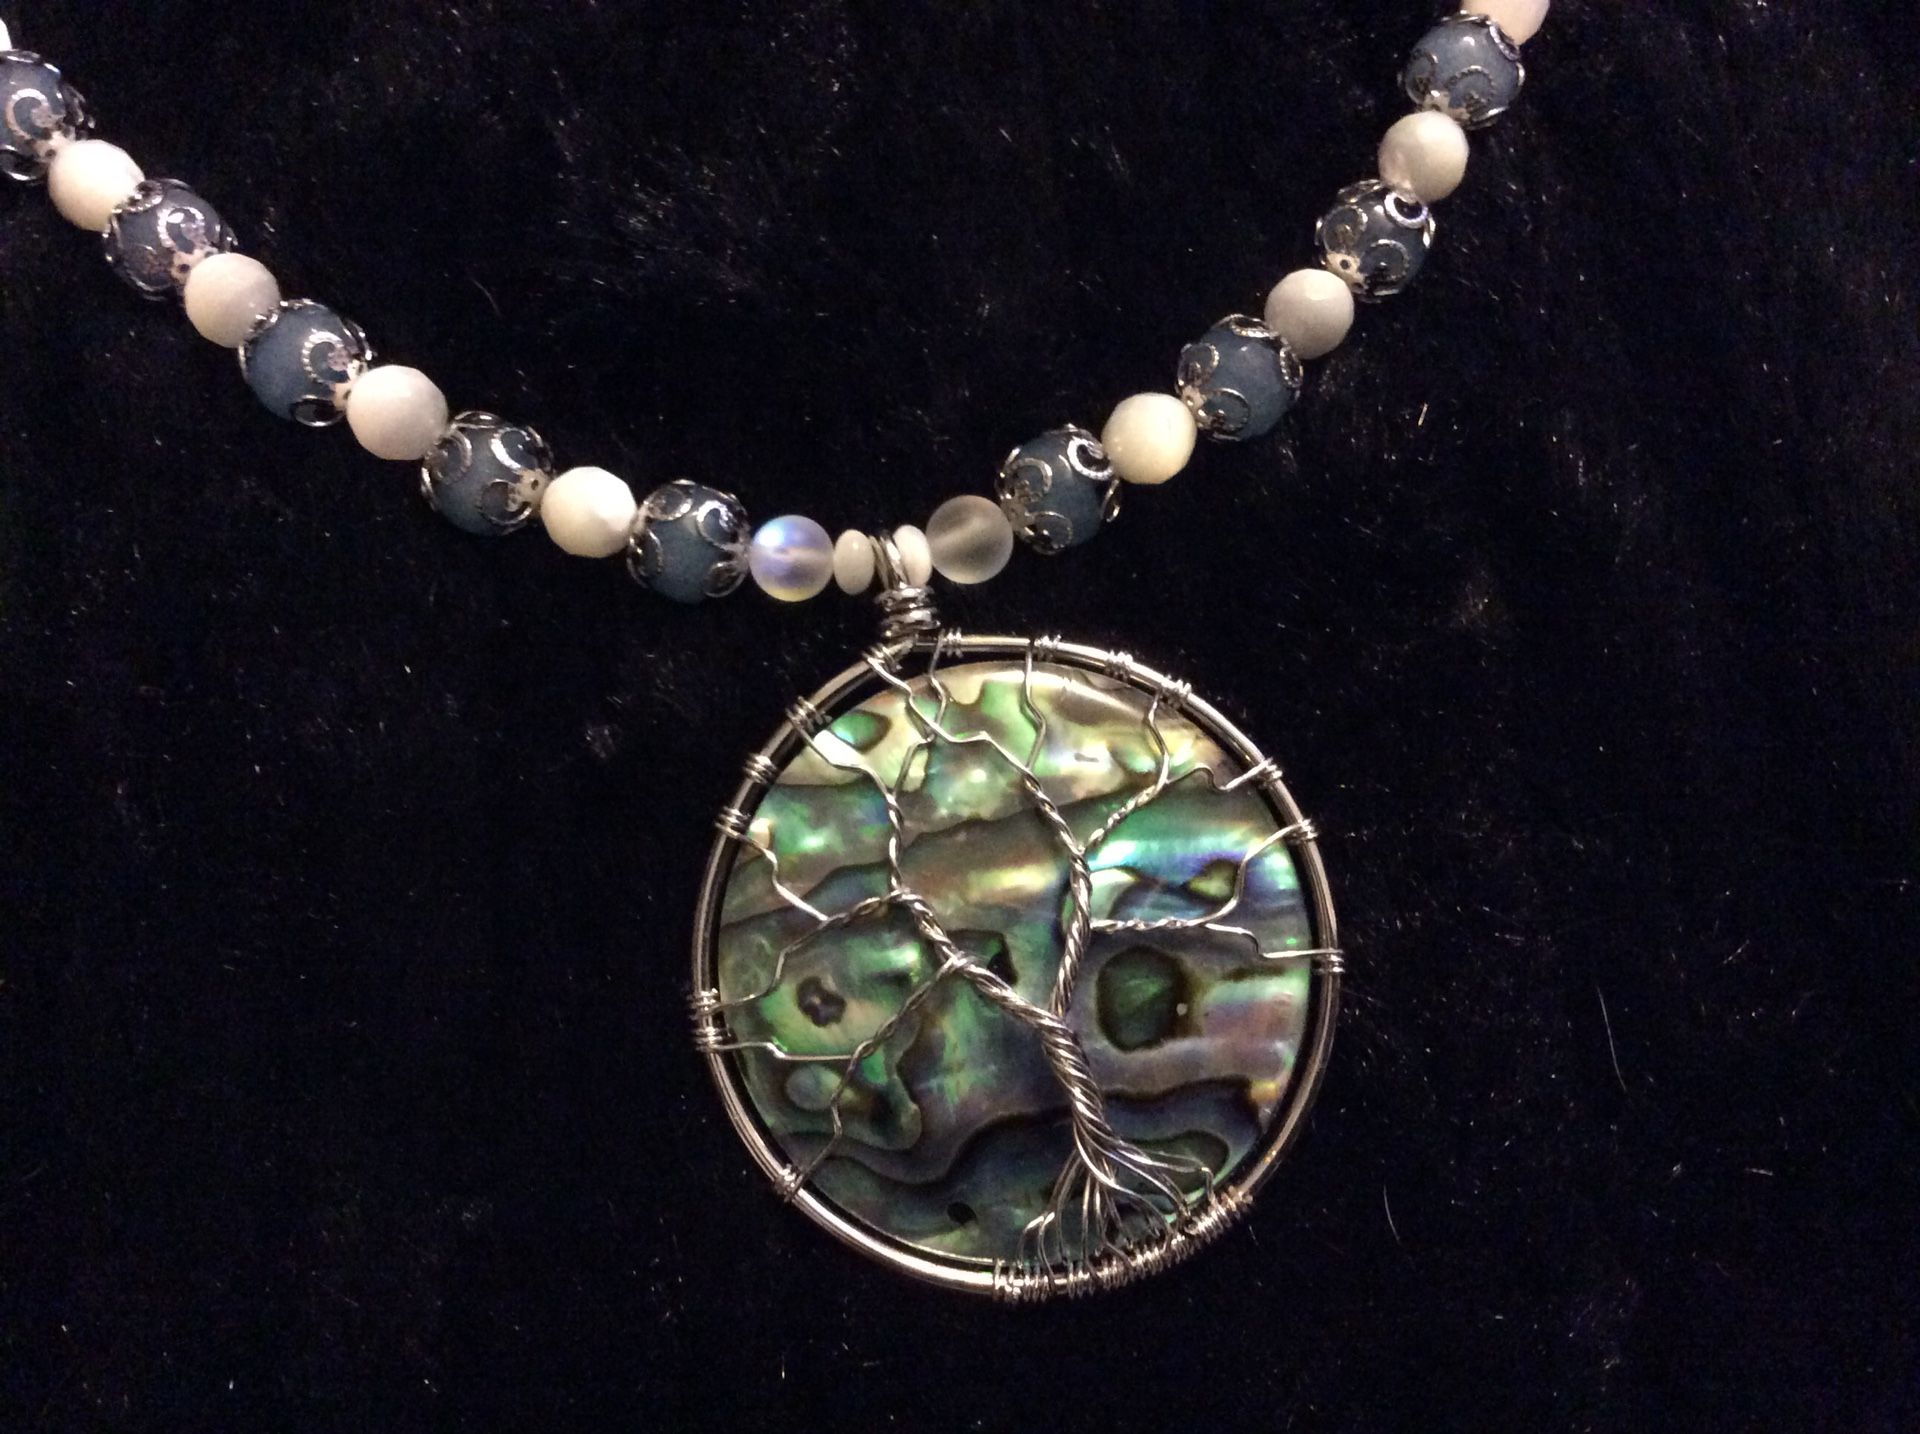 Tree of life abalone pendant on aquamarine, moonstones, Mother of pearl and labradorite beads with a sterling silver chain and adjustable clasp